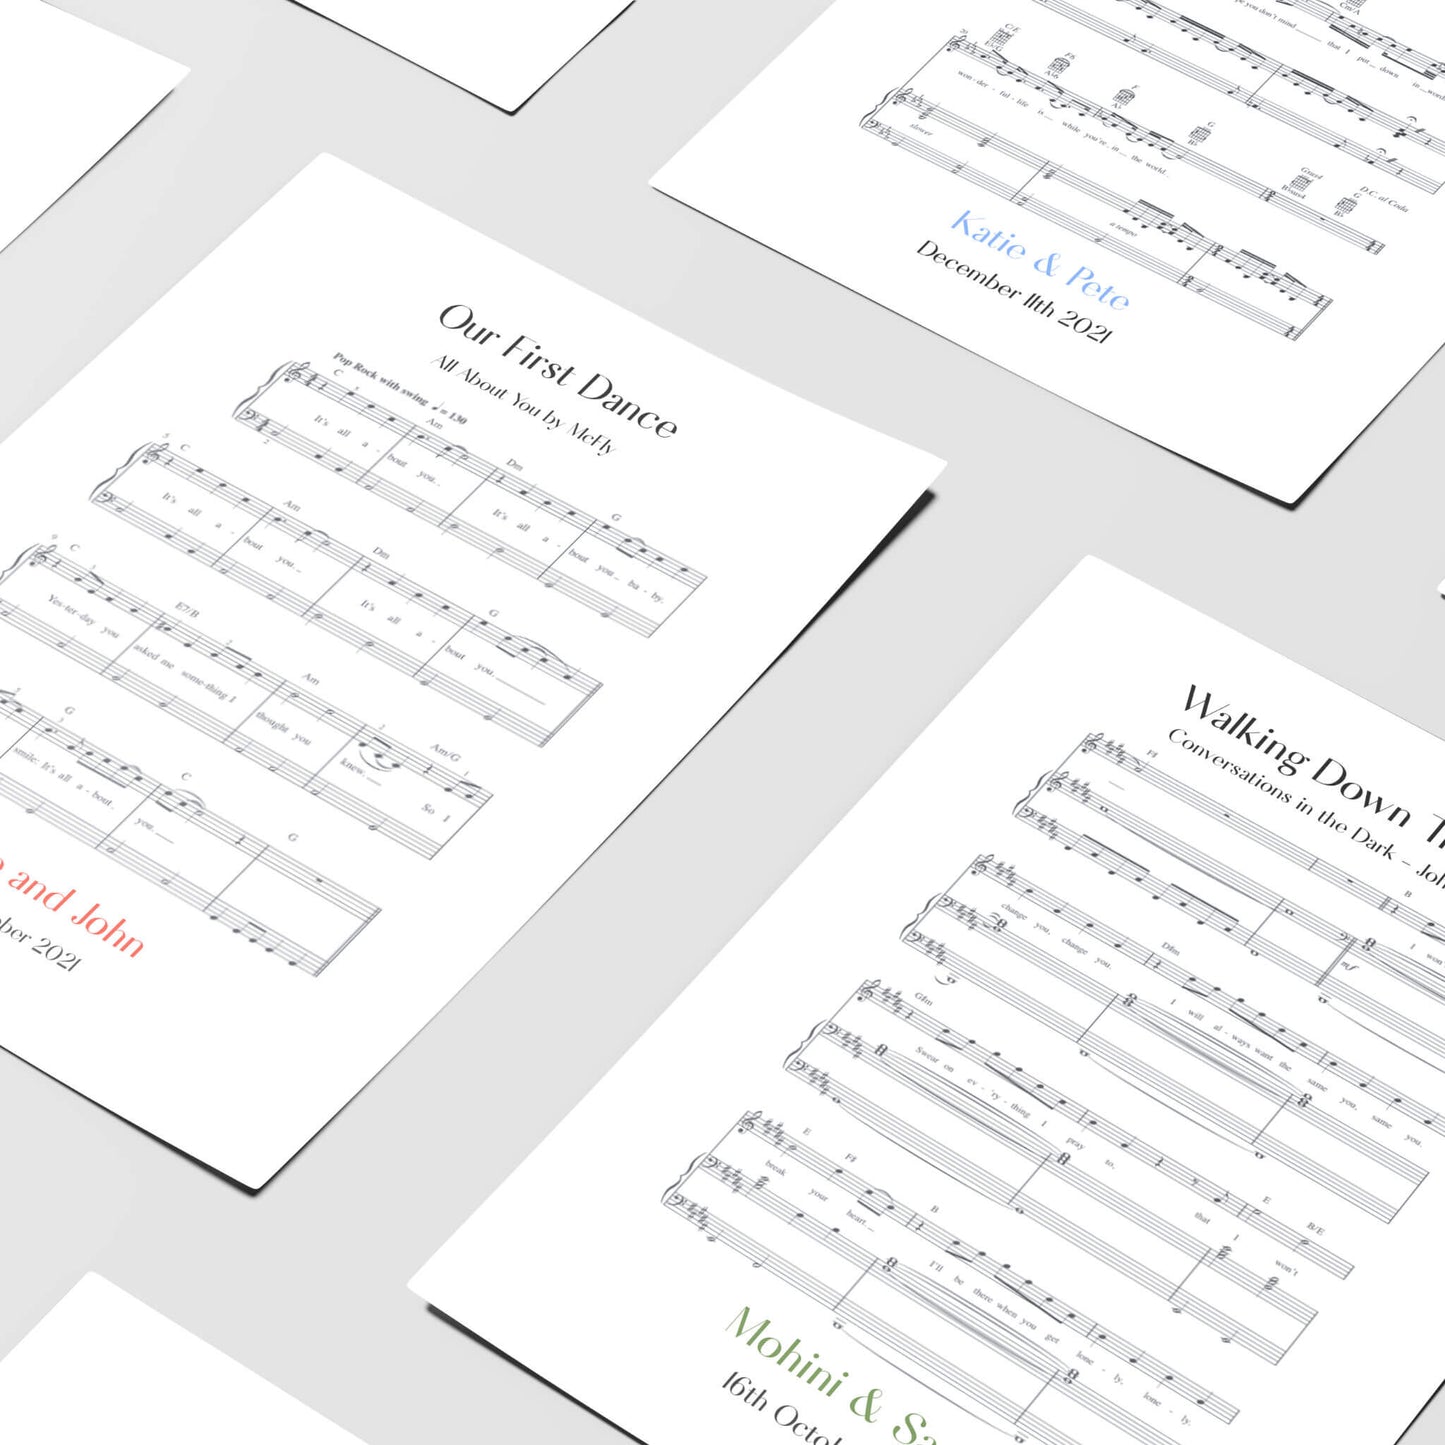 Personalized Song Sheet Music Print